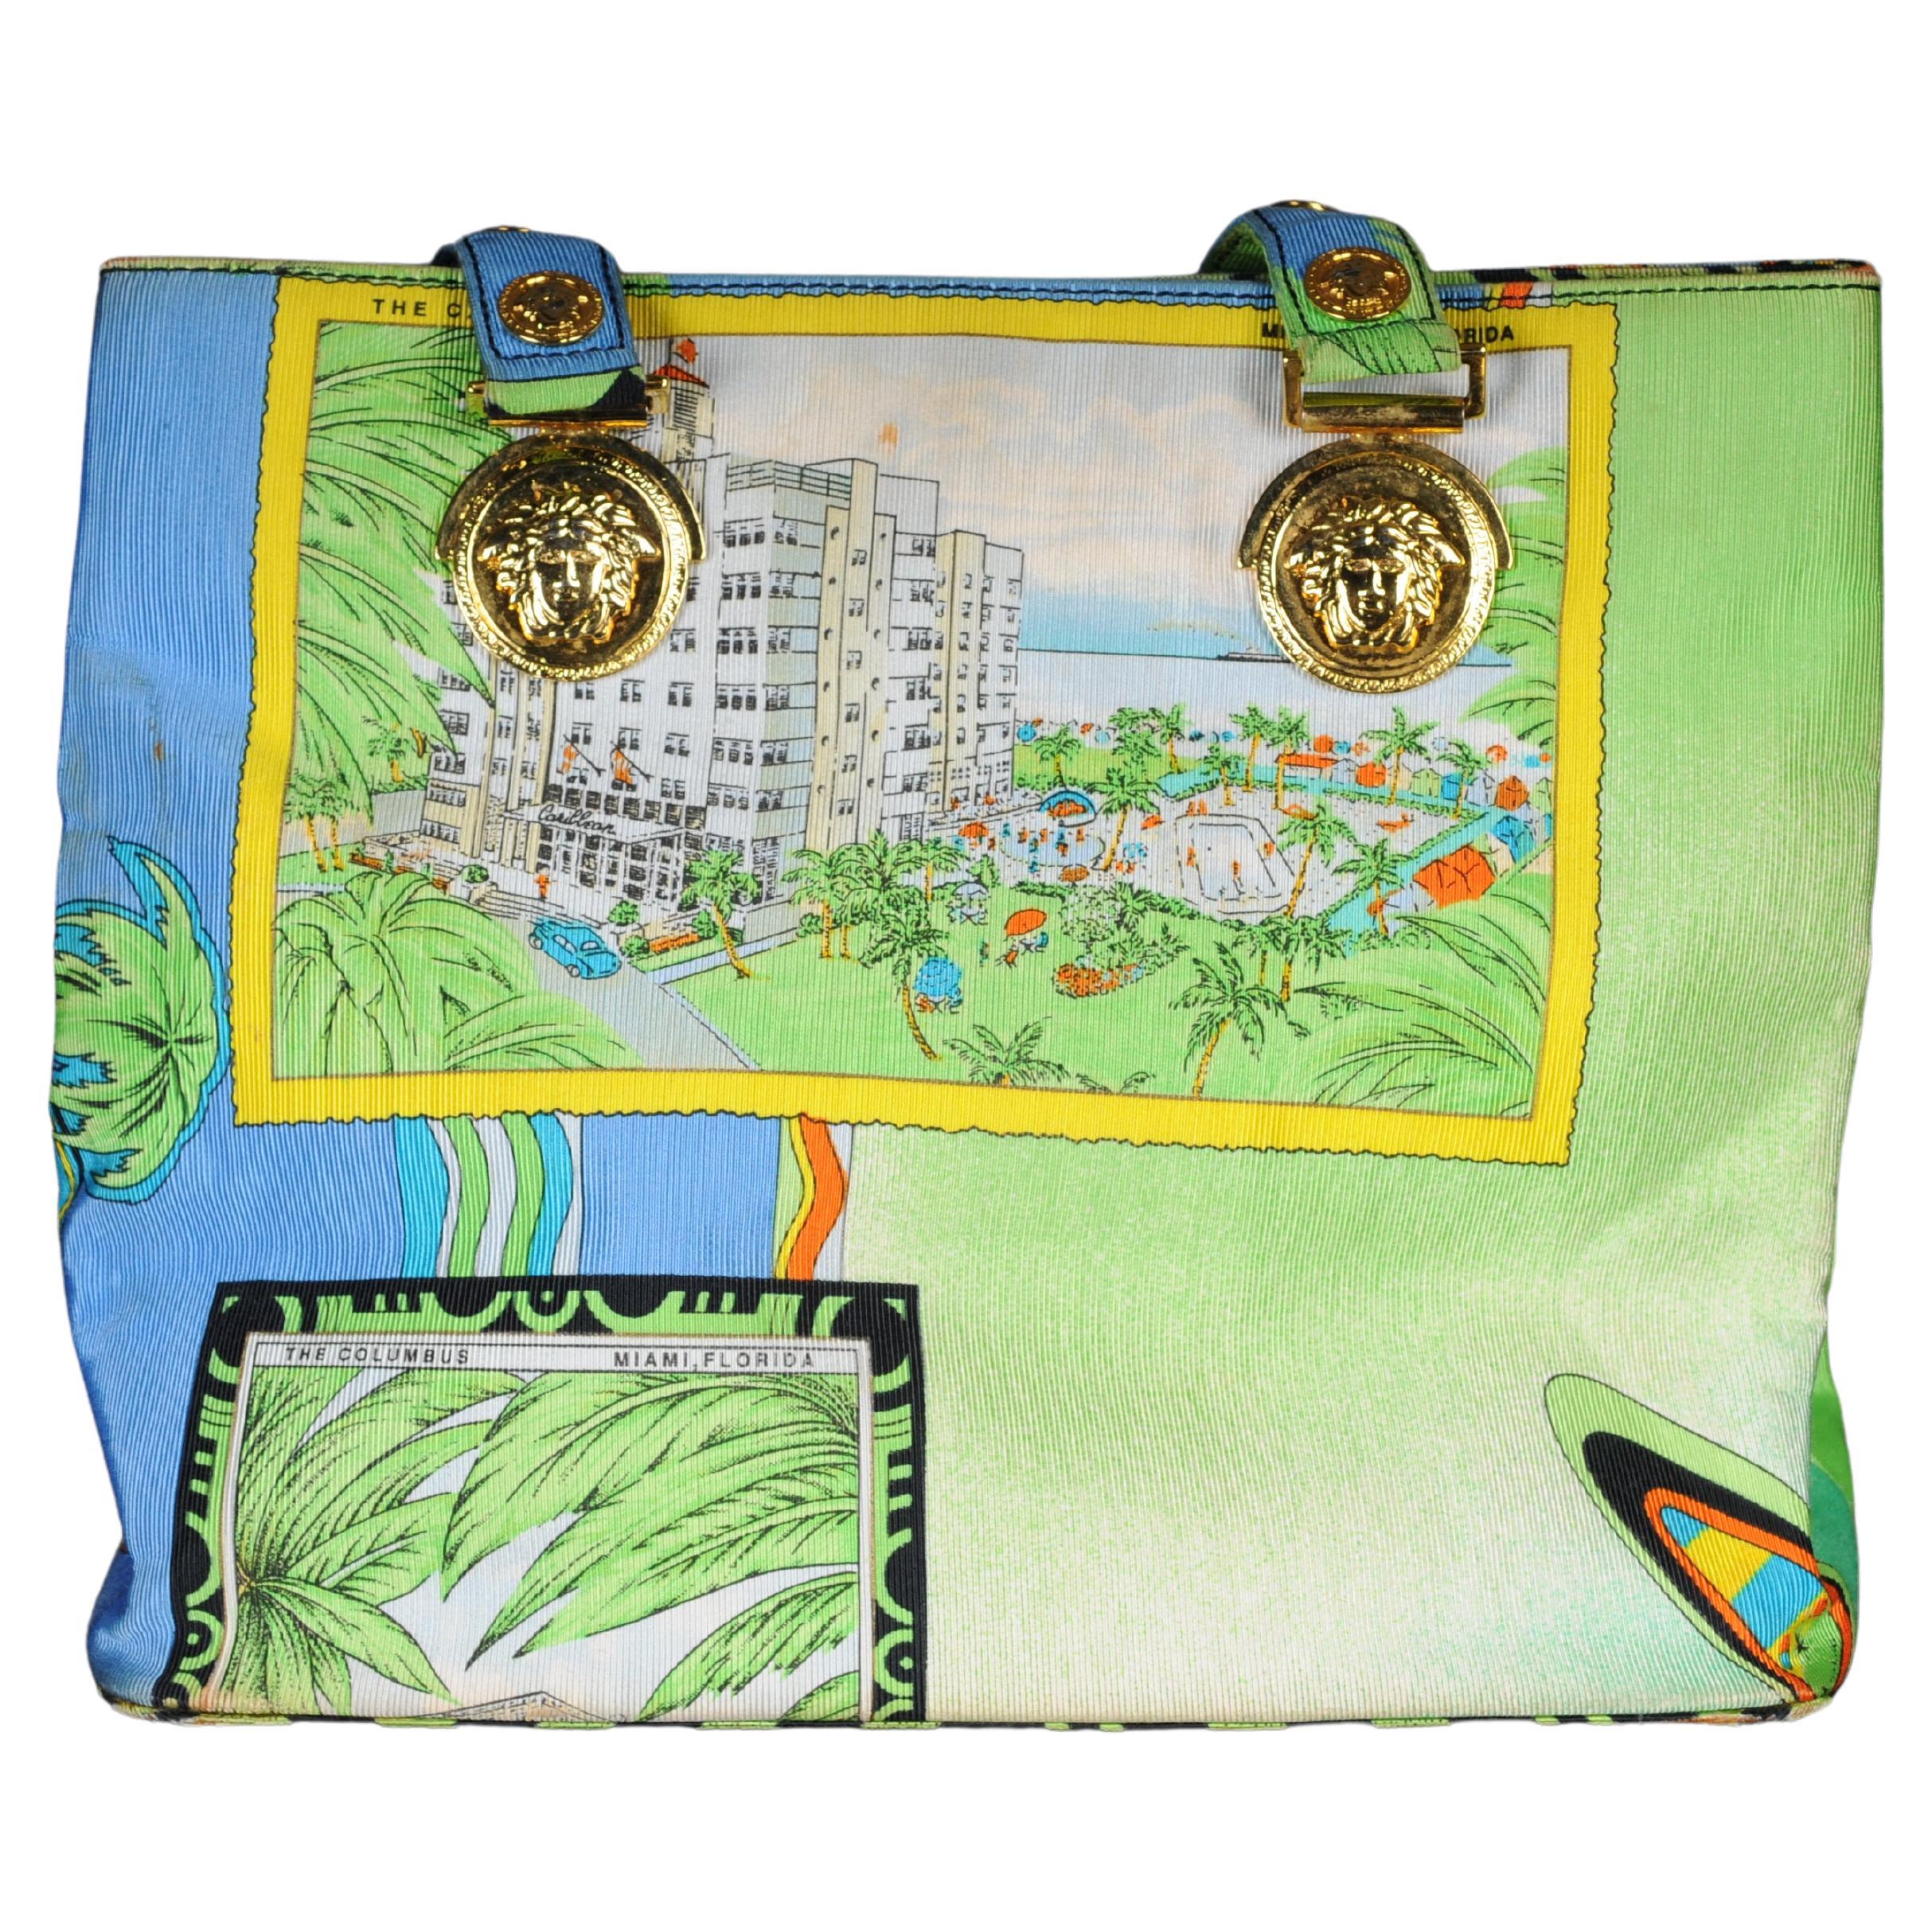 Gianni Versace Miami large silk shoulder bag from 1993 with Medusa medallions,

South Beach Miami print of tropical vintage ocean front themes can be seen throughout with pop art Miami and Florida lettering.
Handle slightly damaged